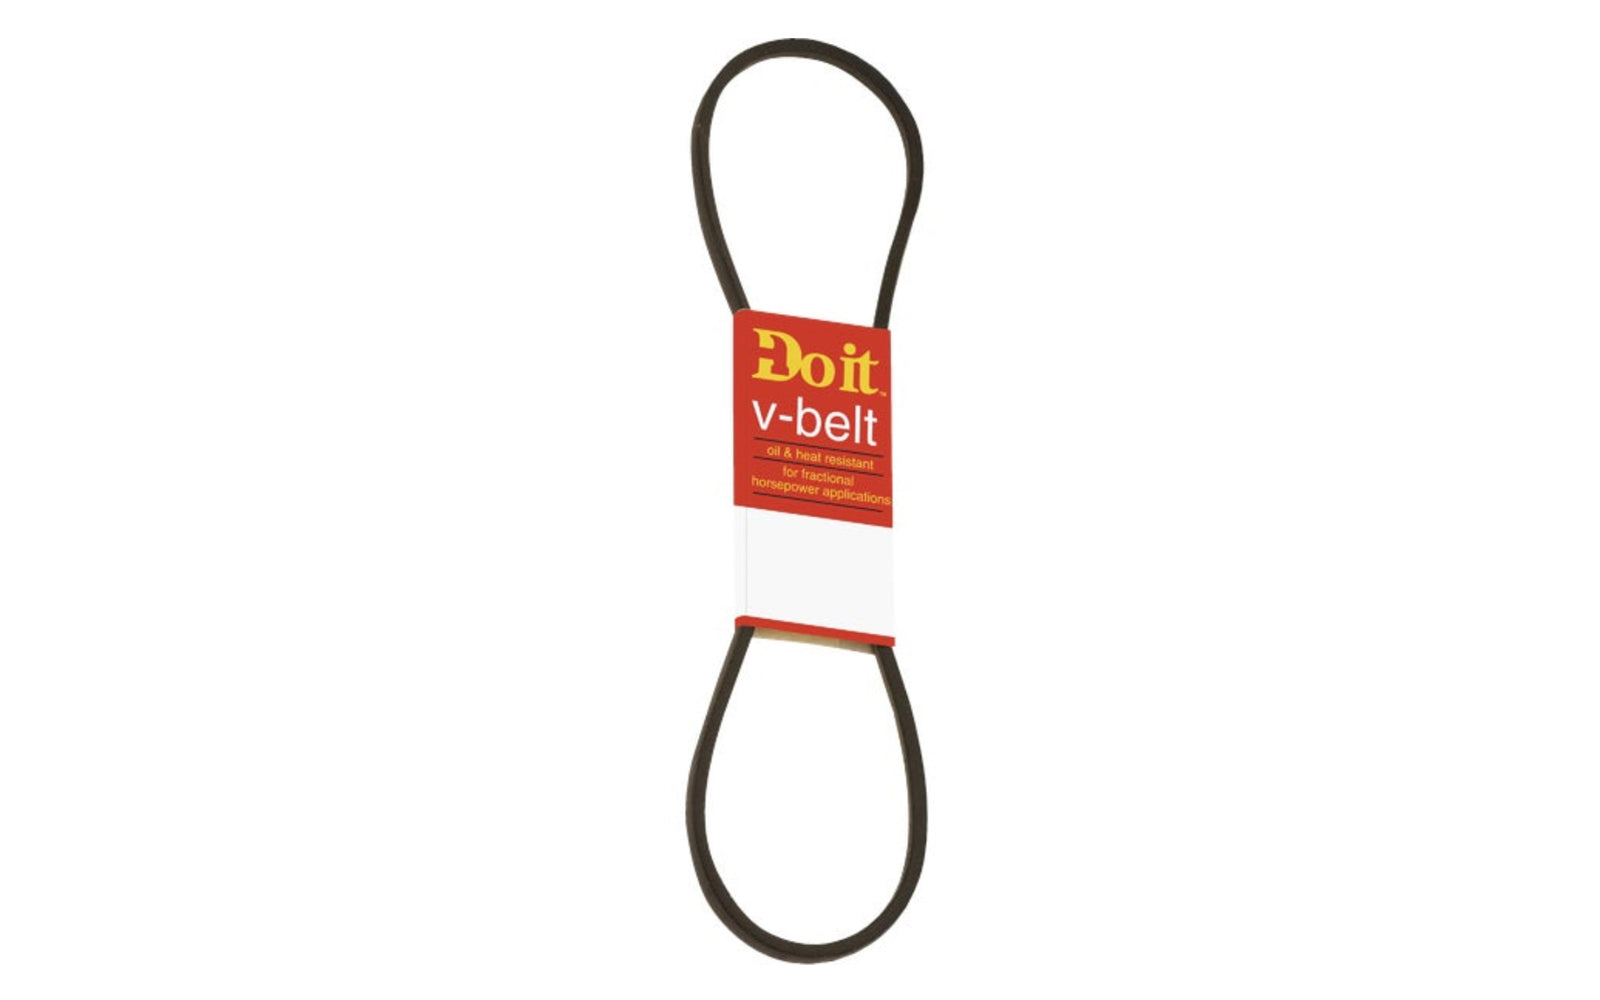 29" (736 mm) Long x 21/32" Width Rubber V-Belt. Oil & heat resistant. Recommended for 1-3 HP (horsepower) light-duty applications. Typically the best option for electric powered applications. For refrigerators, washing machines, pumps, stokers, woodworking machines. Pulley type: A-Pulley.